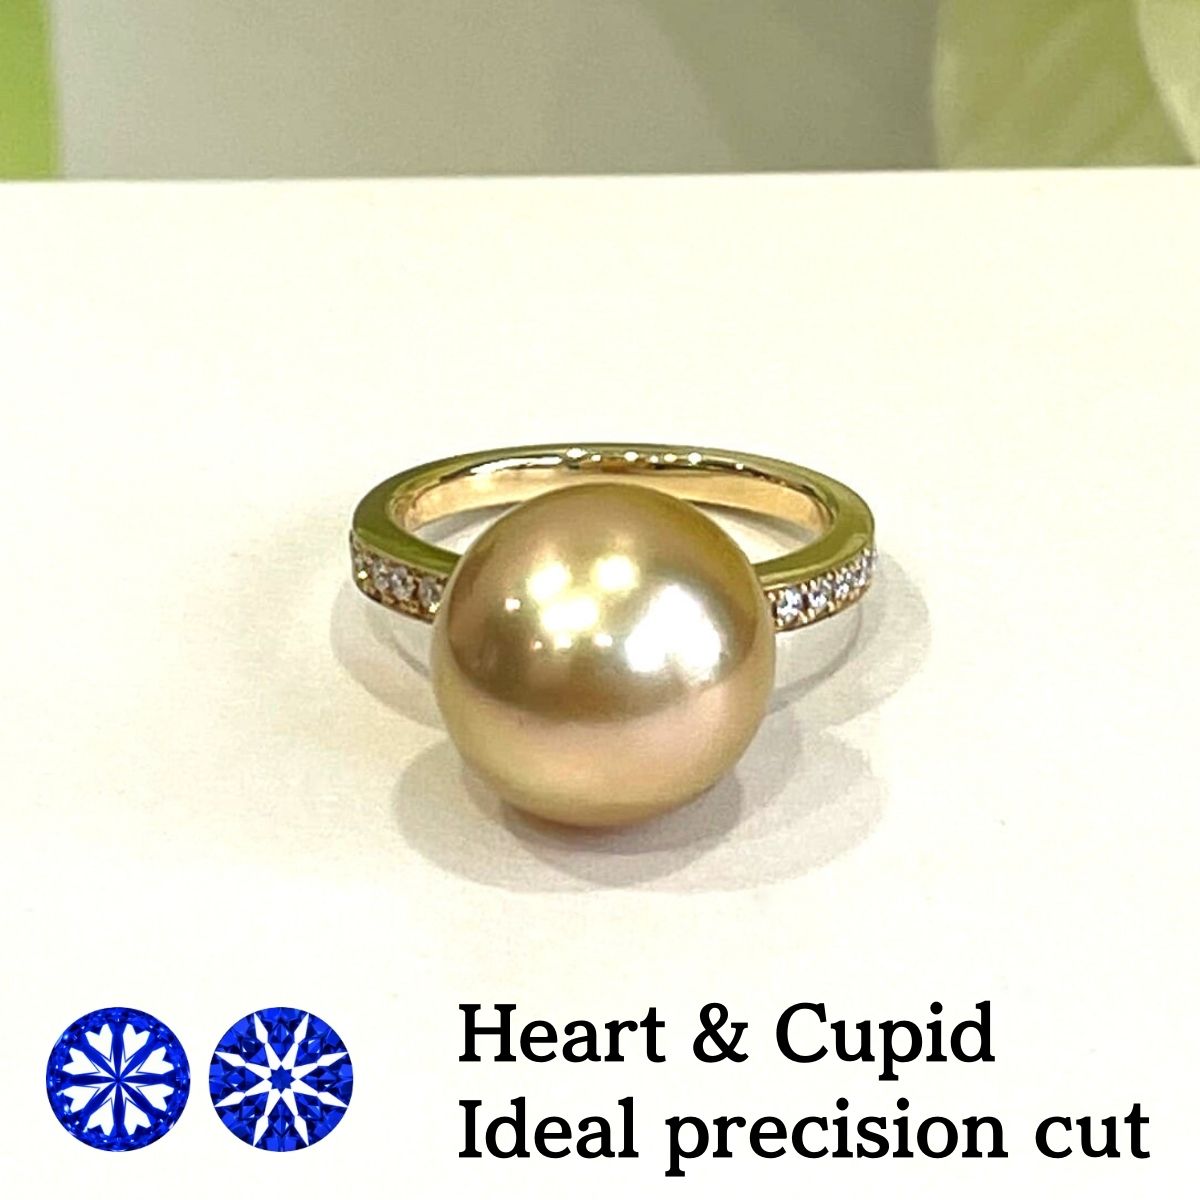 [one of a kind] K18 golden pearl diamond Ring diamond 0.150ct(Ideal precision cut) size :JCS11.5 US6.25(adjustable)